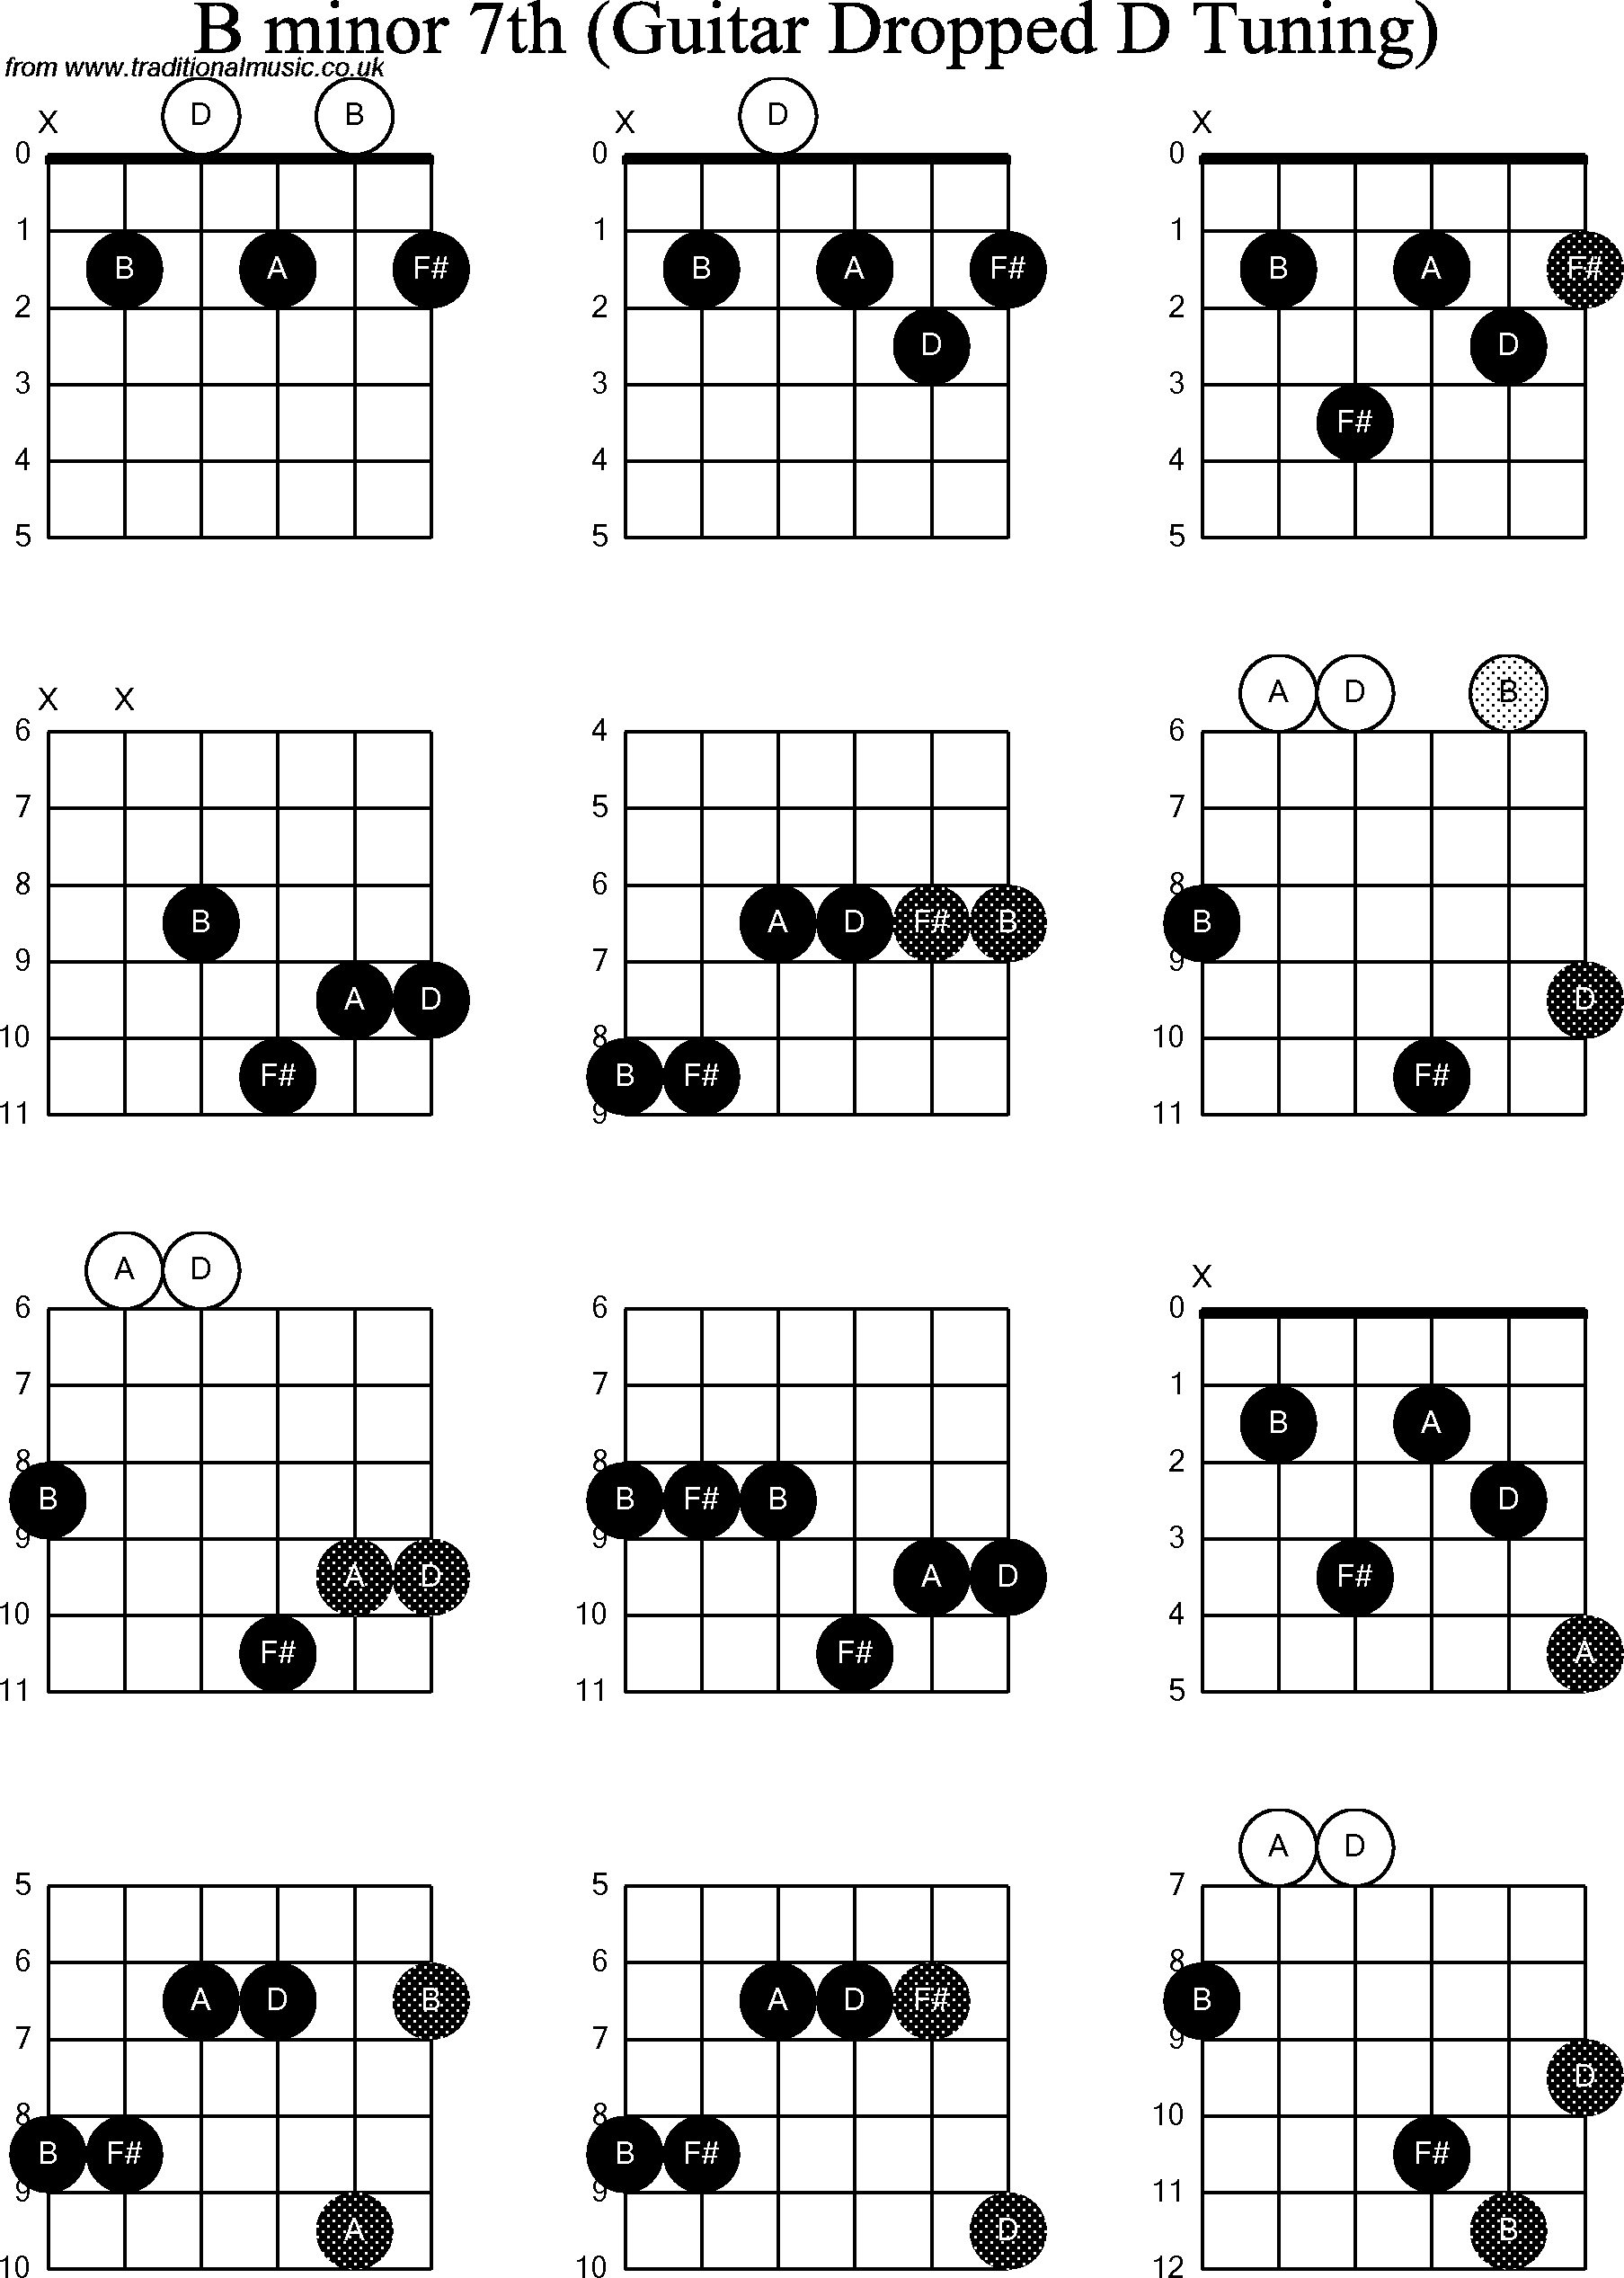 Chord diagrams for dropped D Guitar(DADGBE), B Minor7th